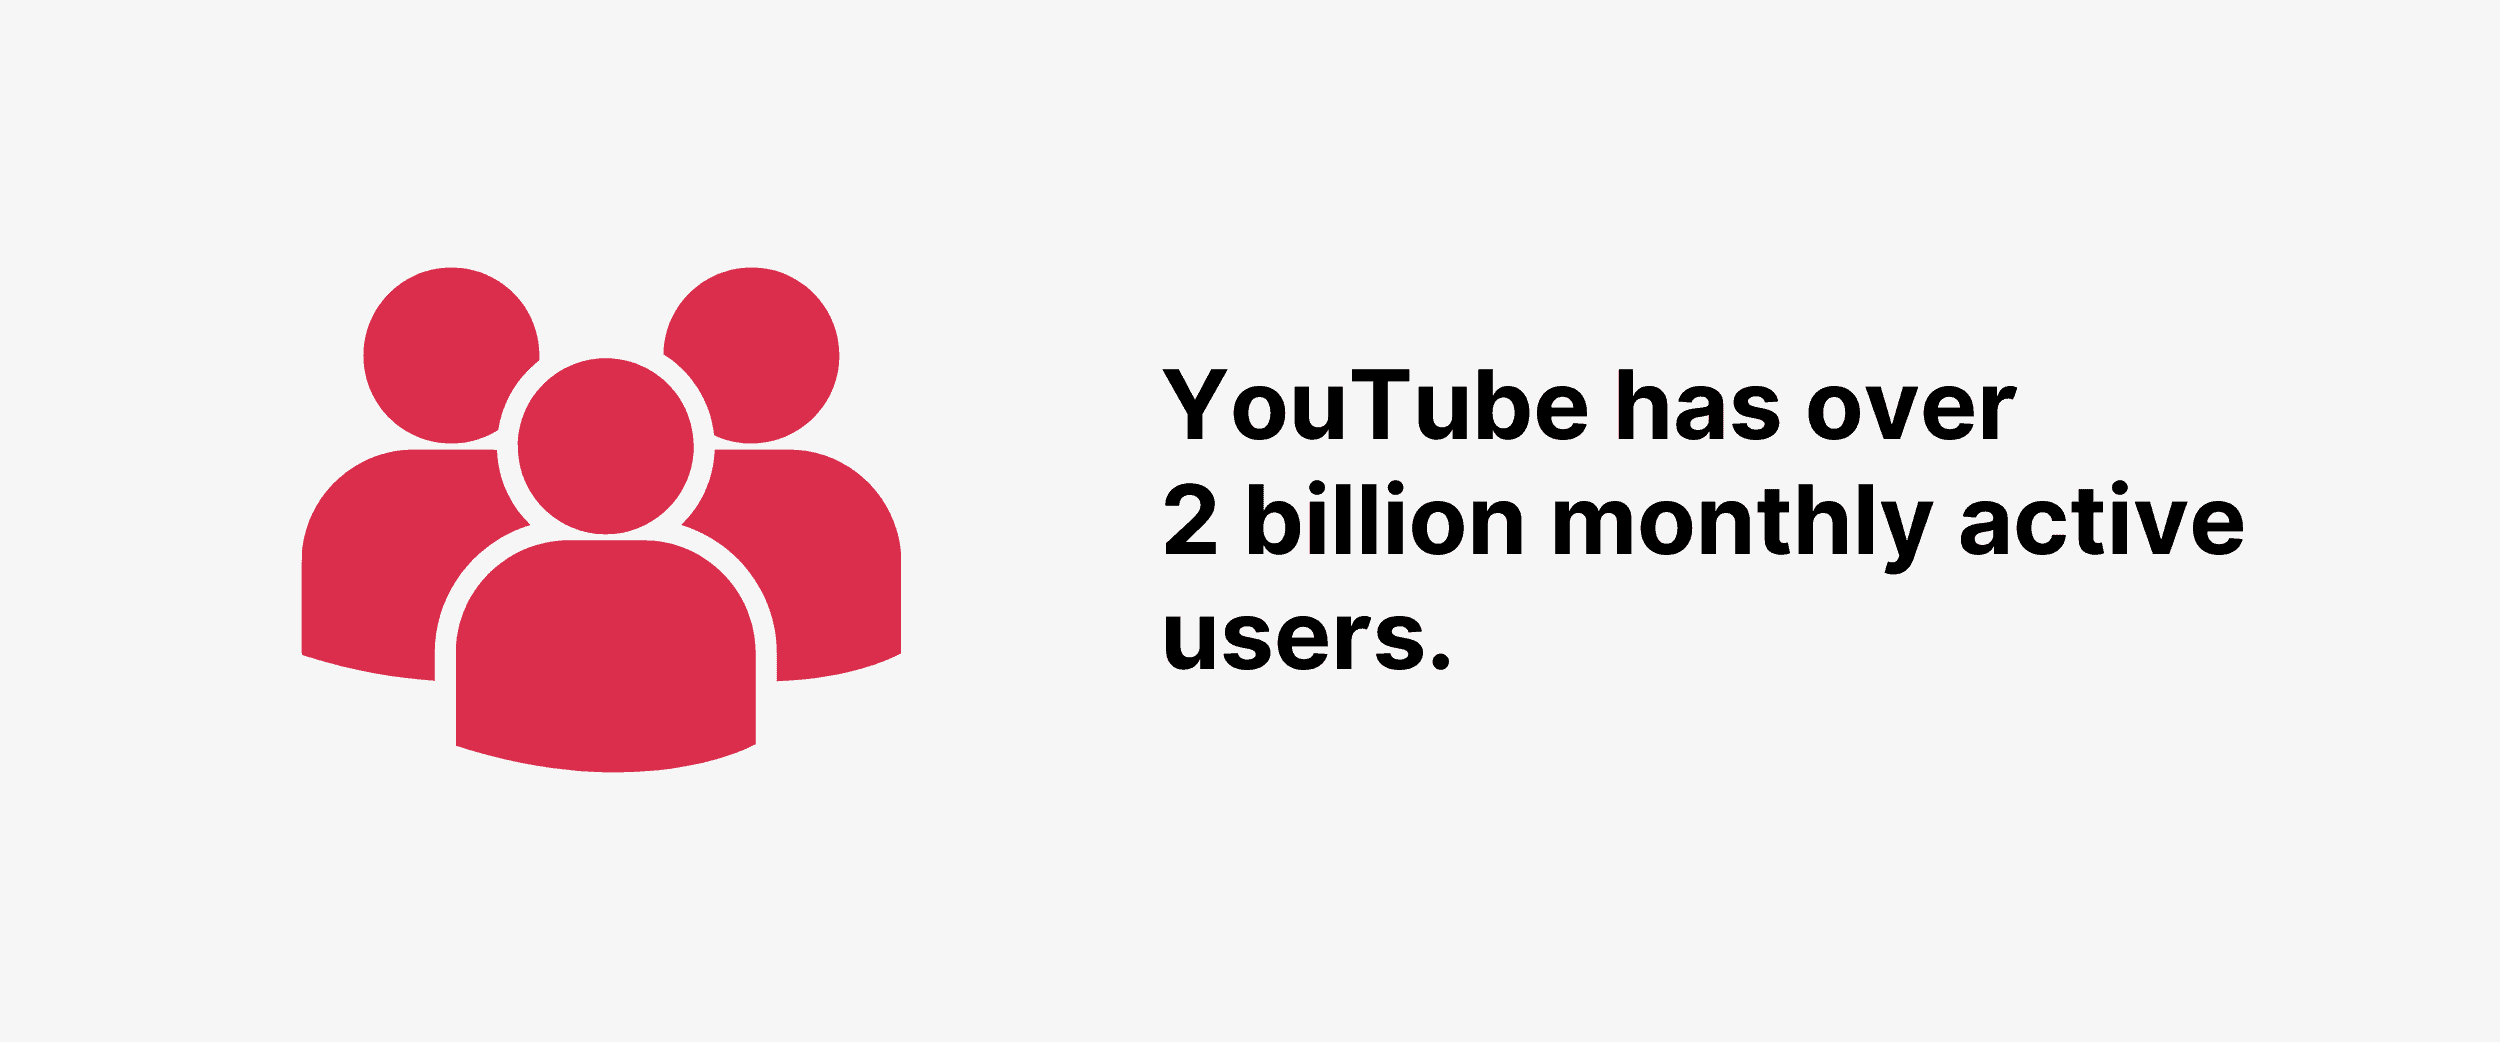 YouTube has over 2 billion monthly active users